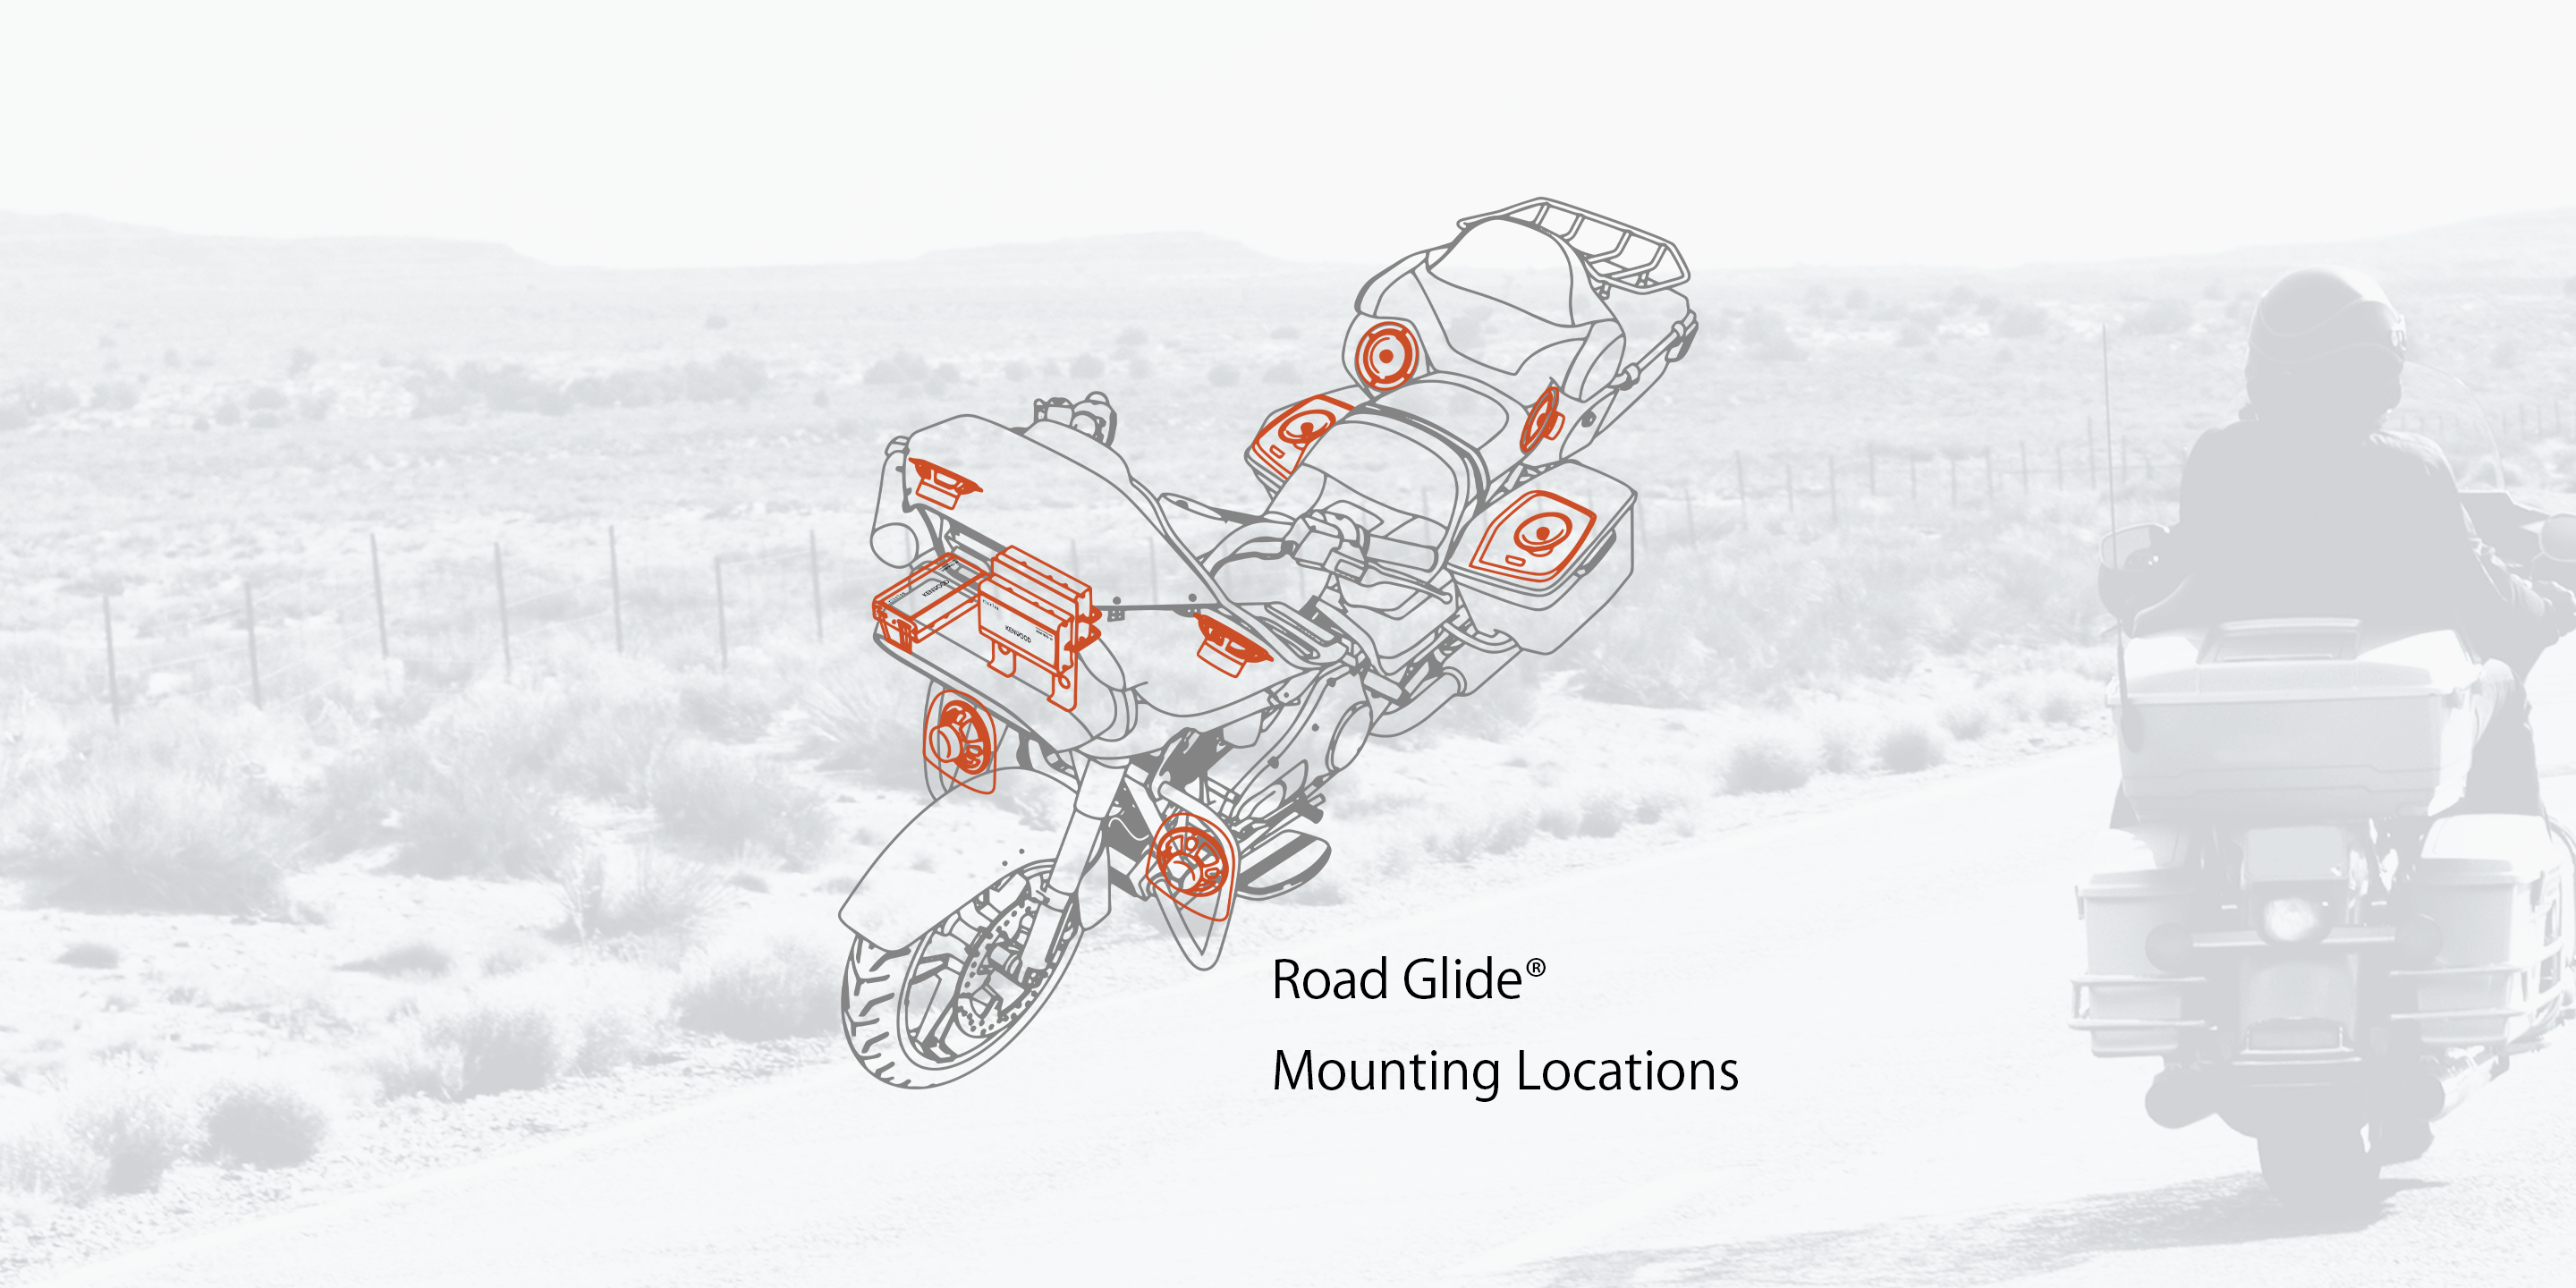 Street Glide® Mounting Locations & Road Glide® Mounting Locations